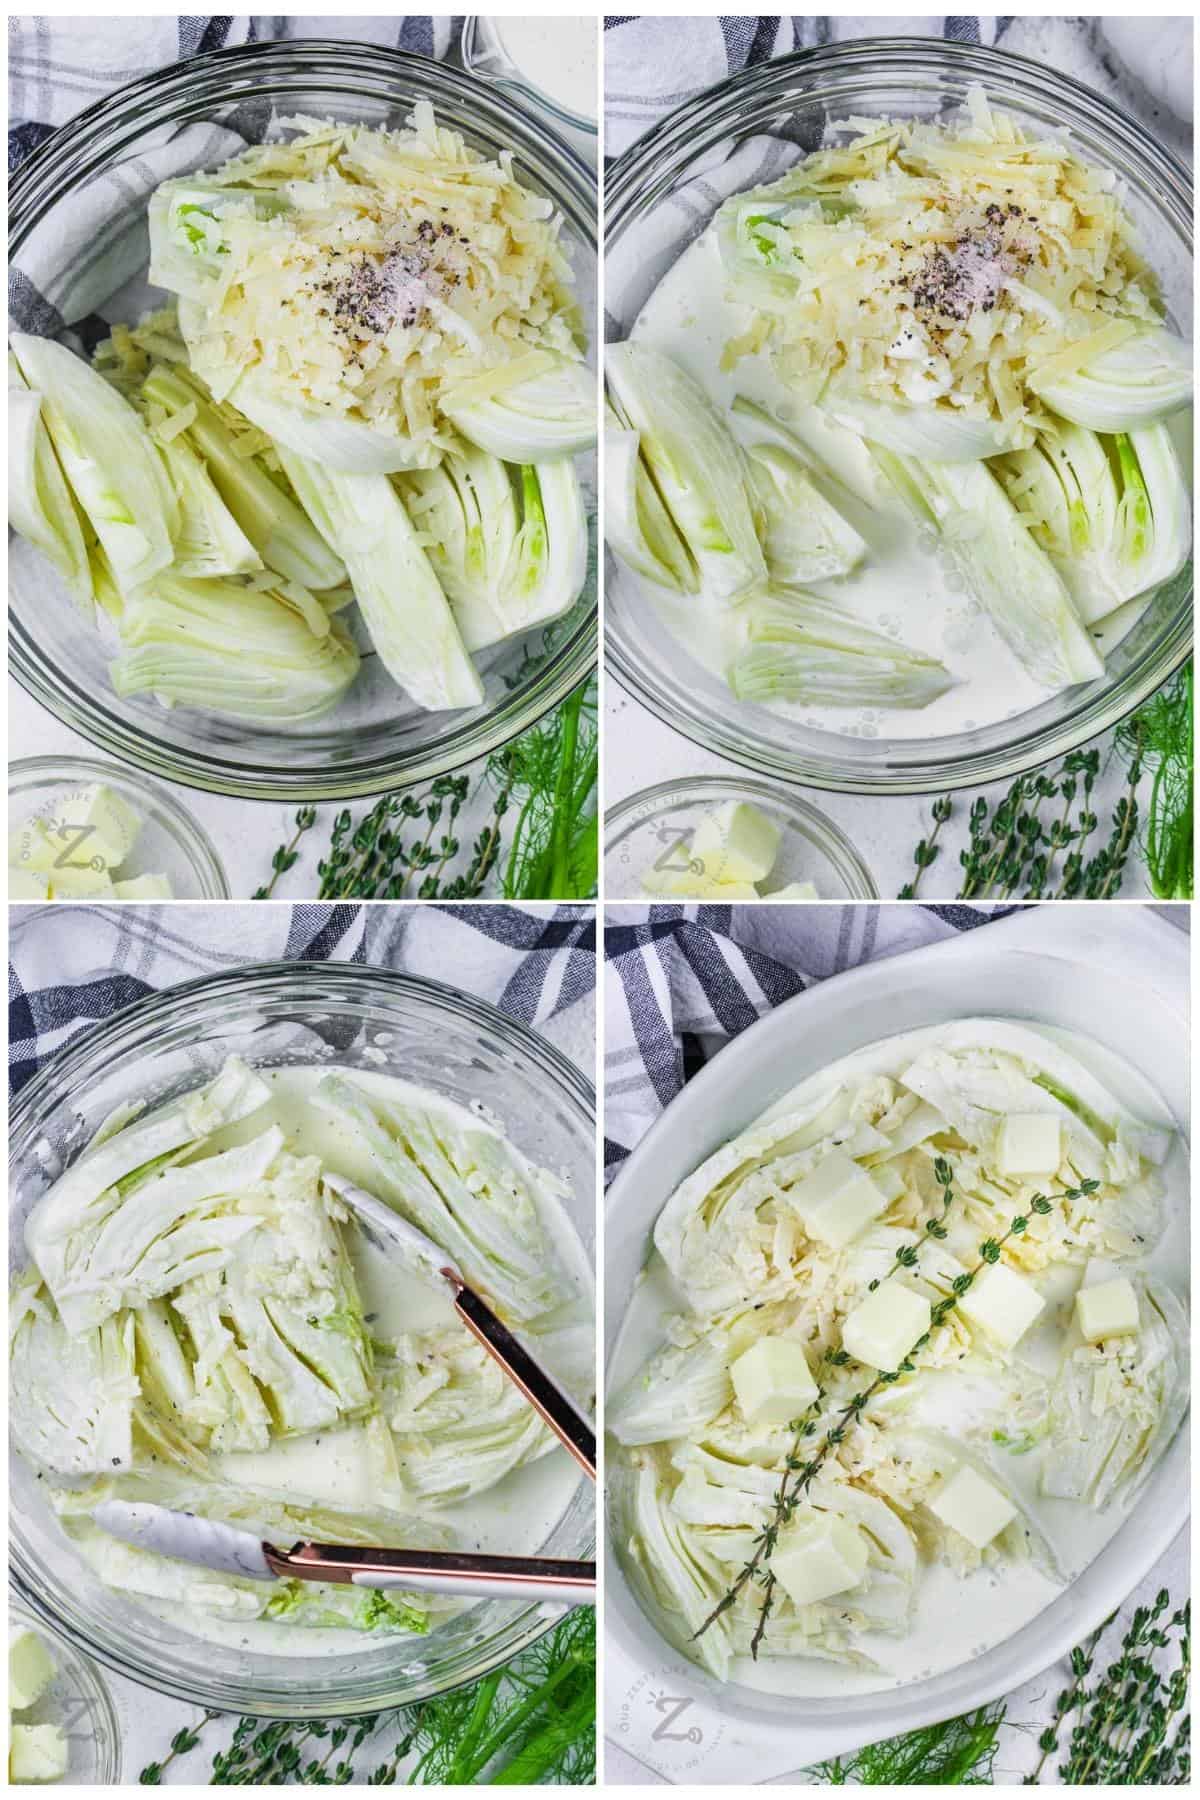 process of adding ignredients together to make Cheesy Baked Fennel